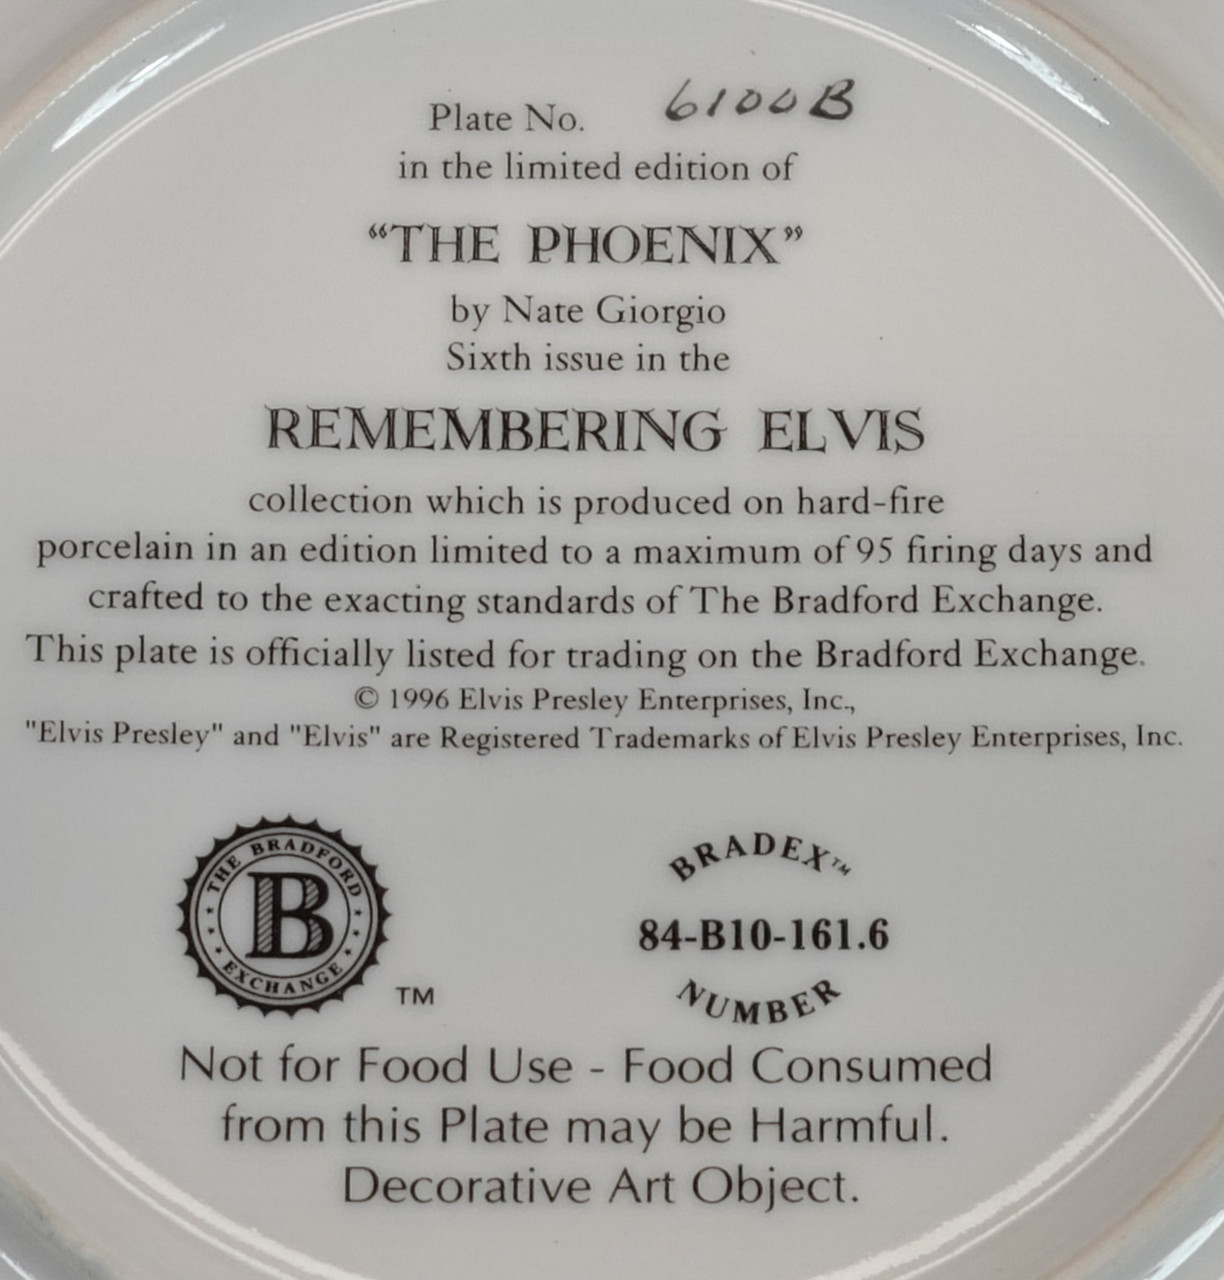 Elvis Presley Limited Edition "The Phoenix" Collector's Plate